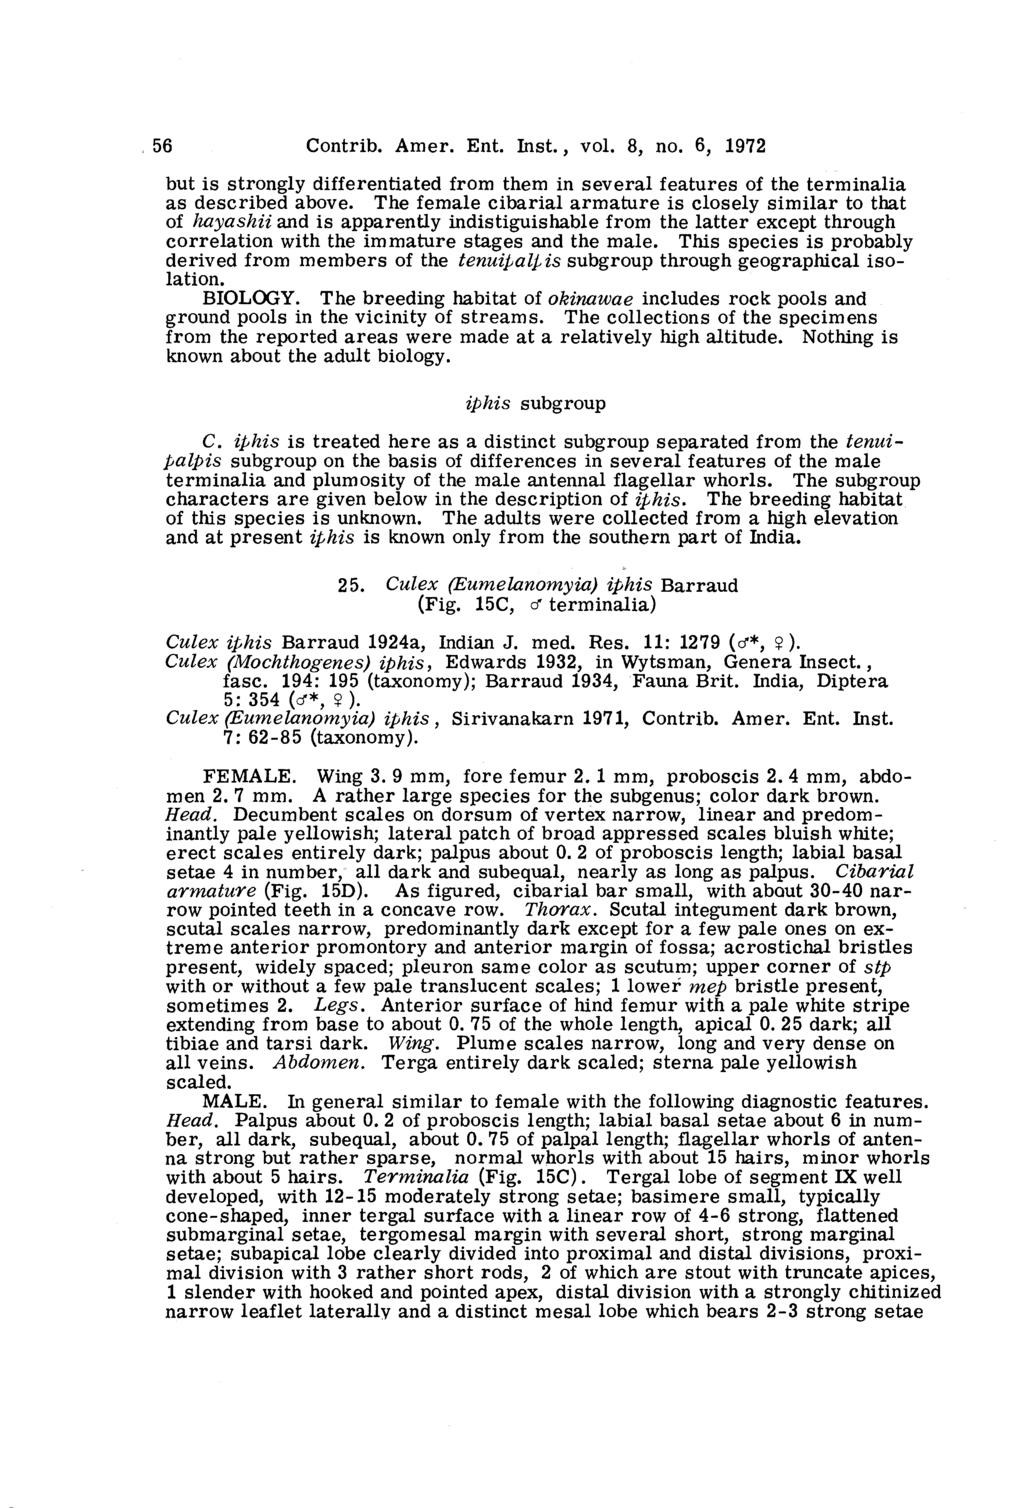 56 Contrib. Amer. Ent. Inst., vol. 8, no. 6, 1972 but is strongly differentiated from them in several features of the terminalia as described above.